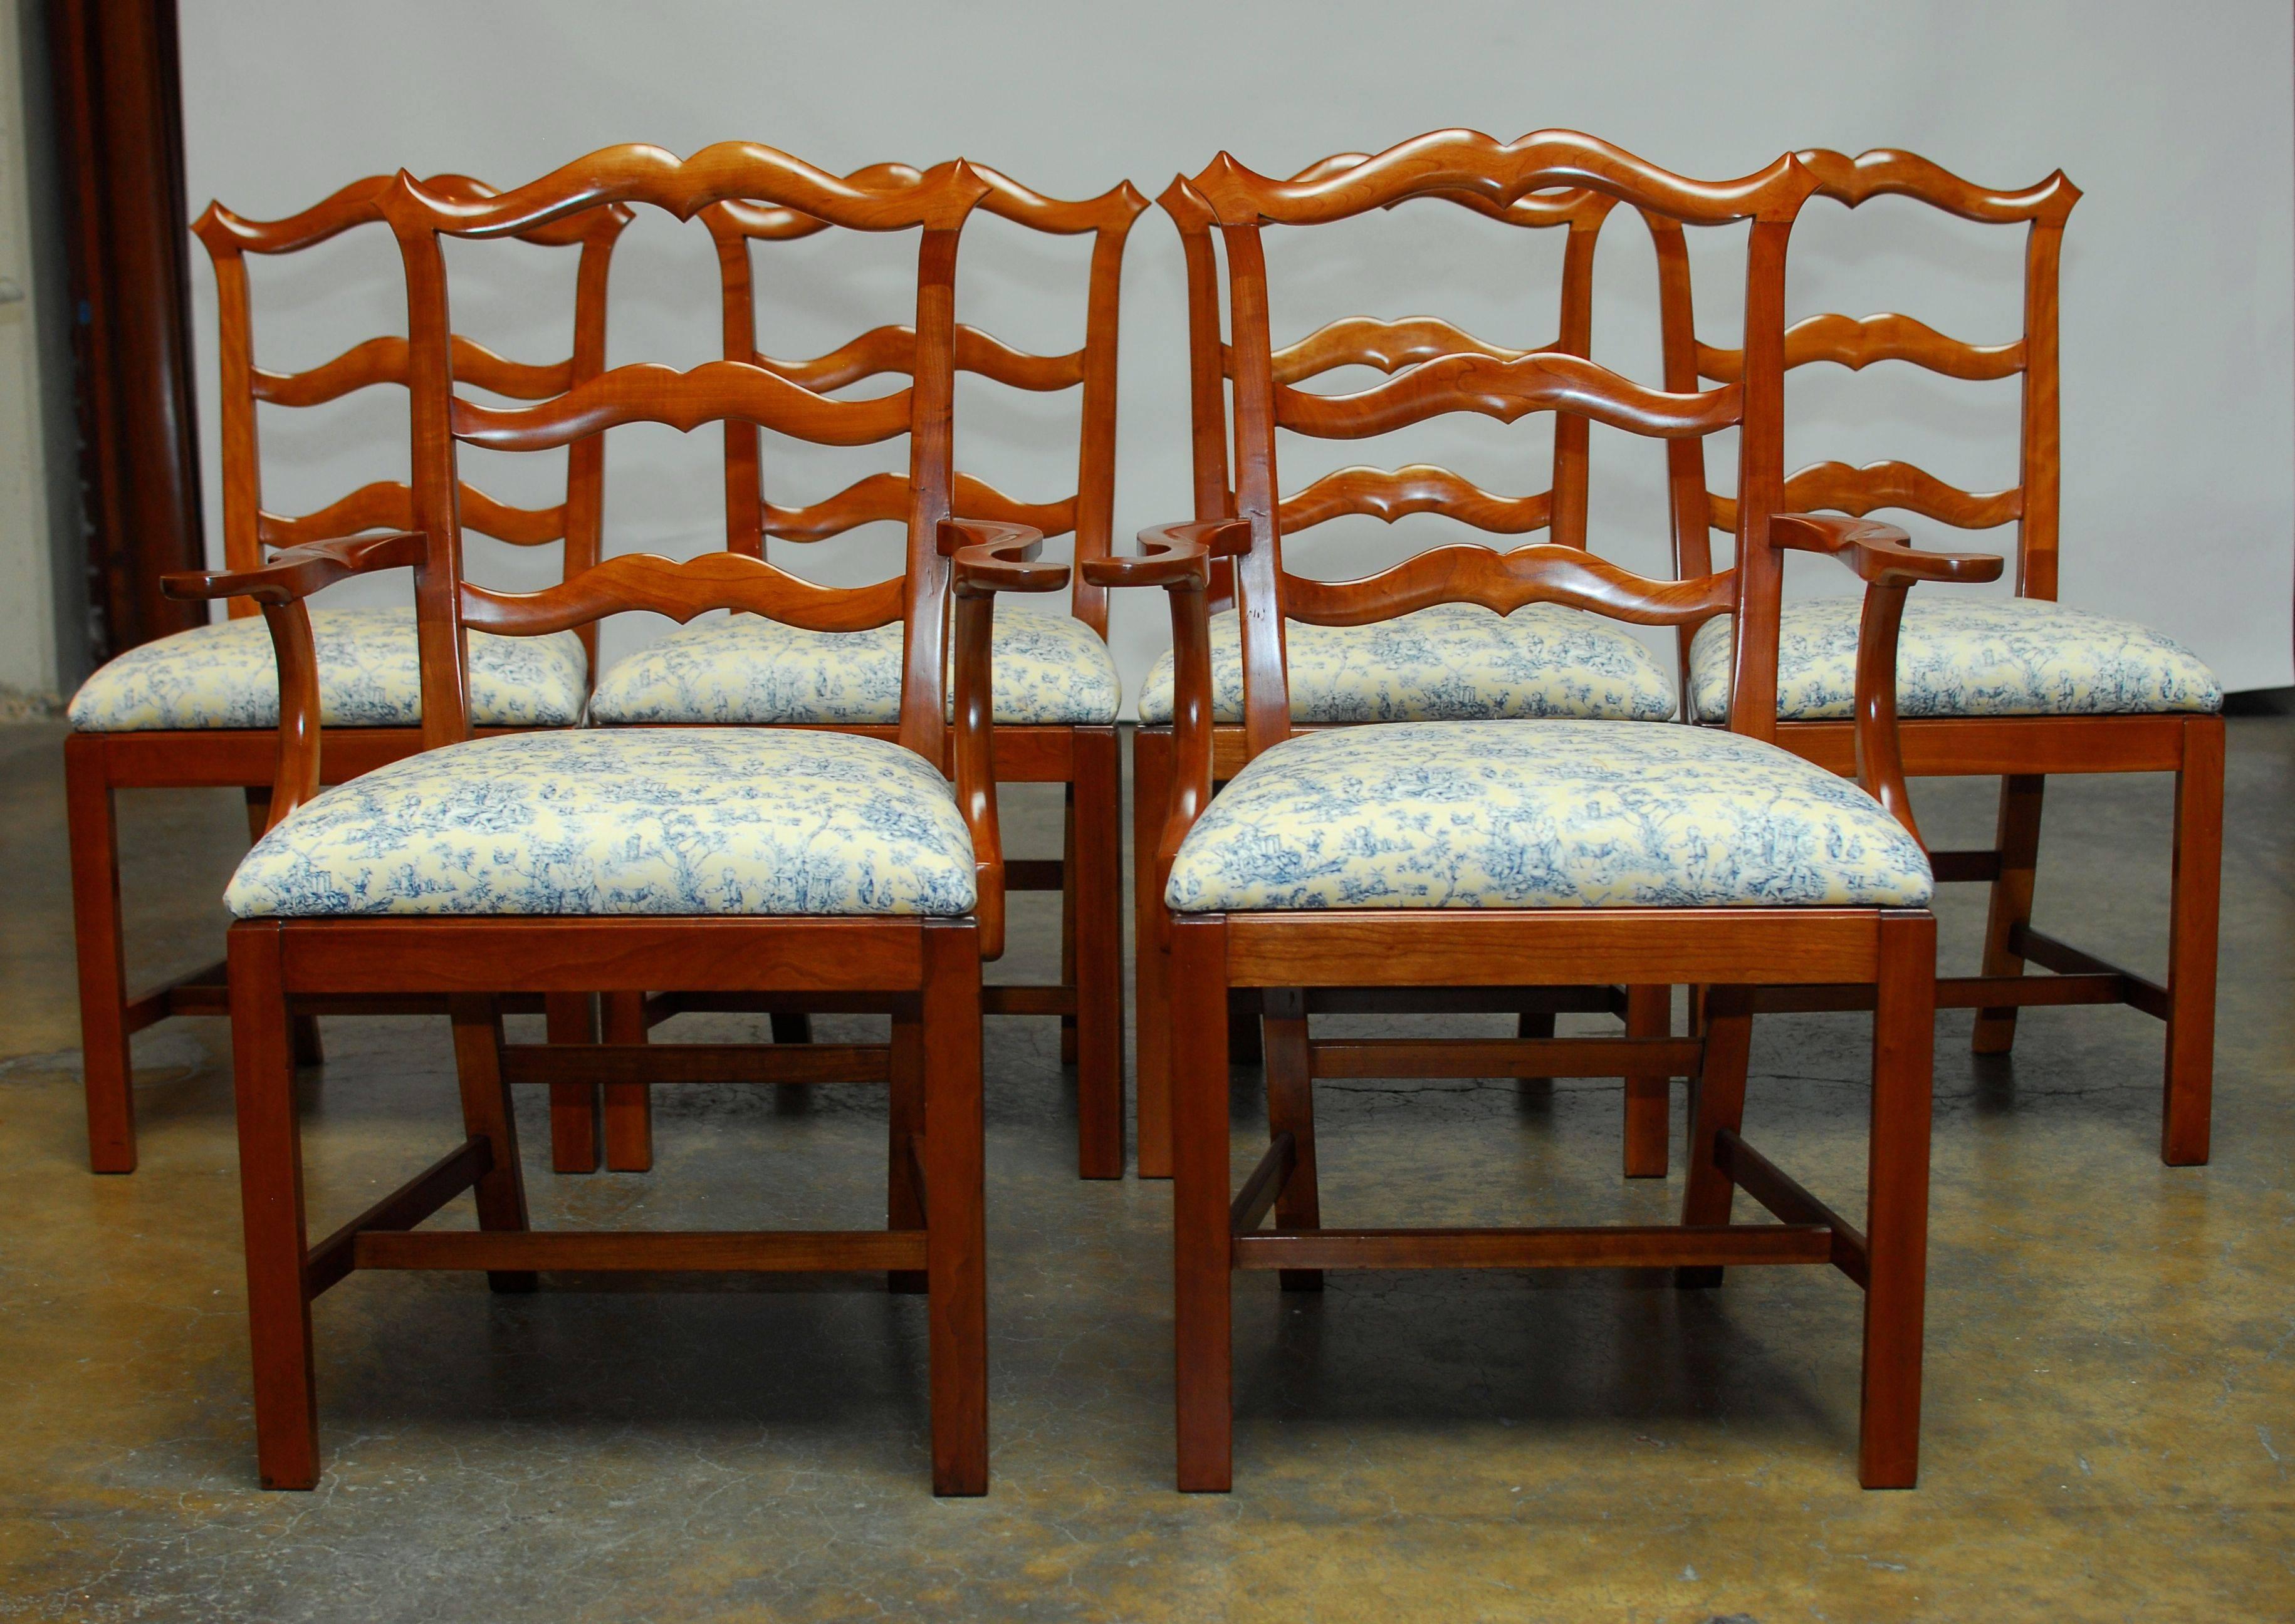 Set of six stately Chippendale style dining chairs featuring a ladder back or ribbon back design. The top crest has peaked corners and resembles a French mustache and is complimented by a delicate yellow and blue French toile upholstery. This